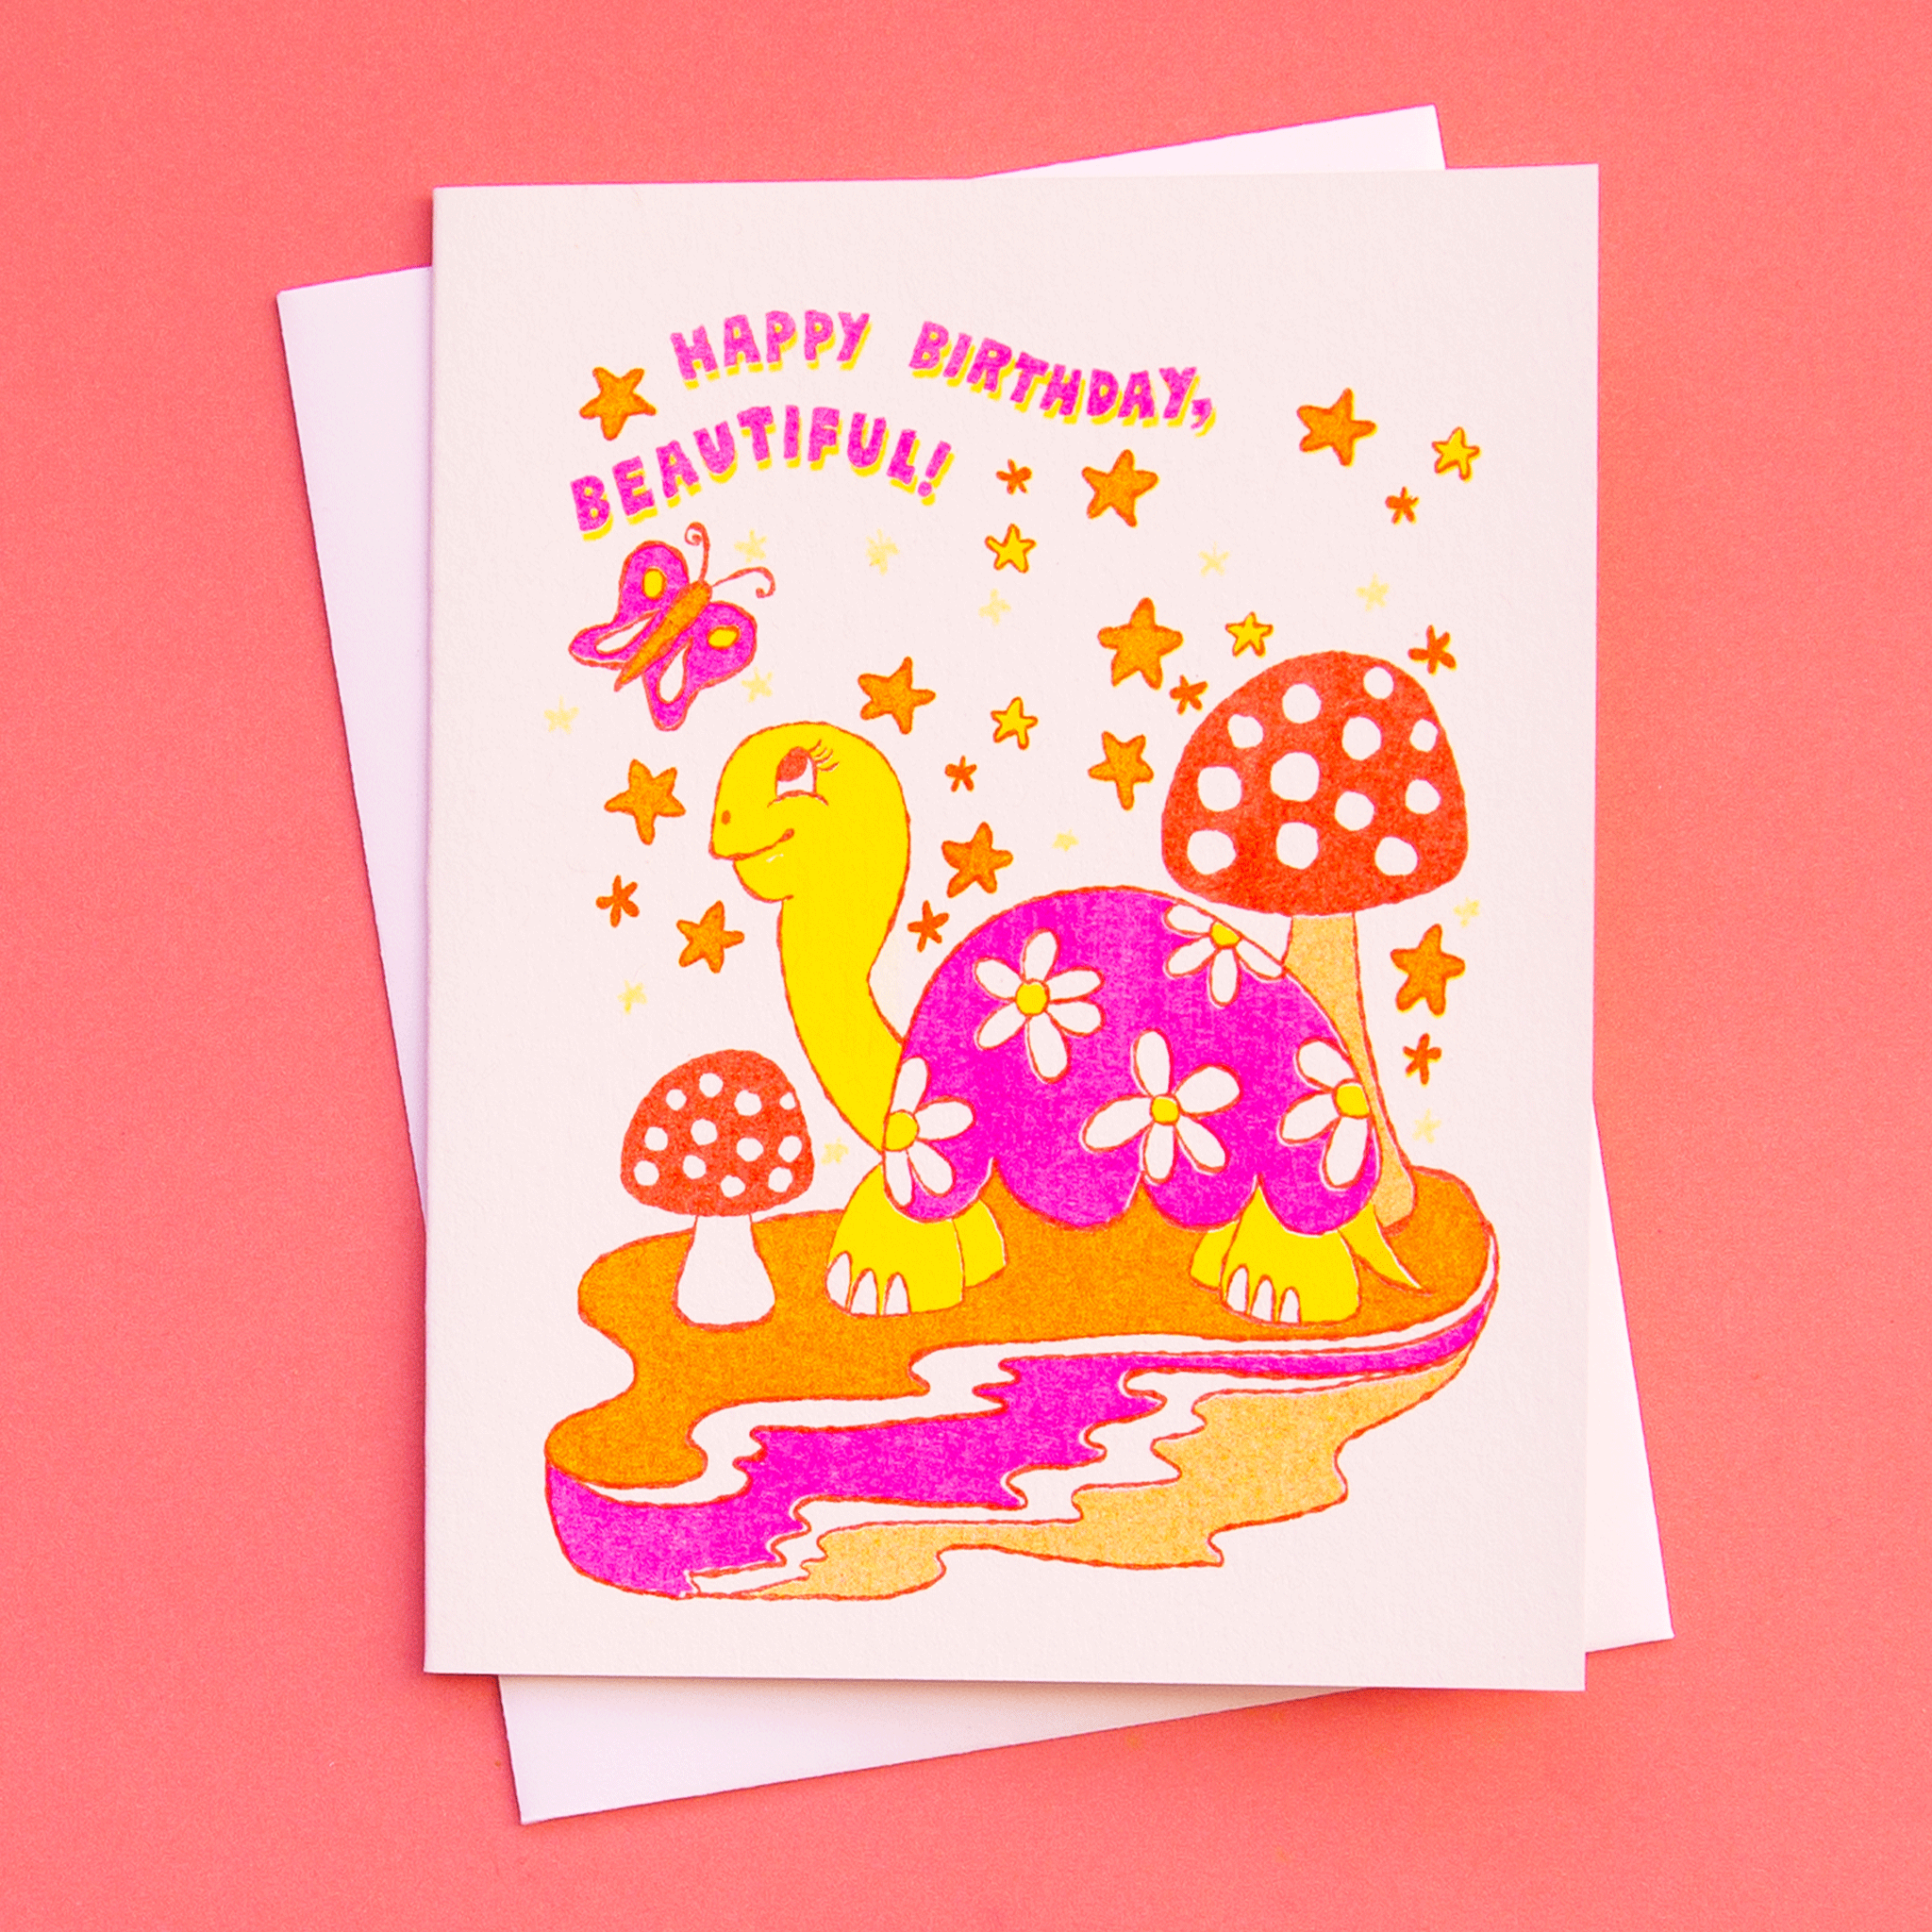 On a coral background is a white card with a colorful, red, pink and orange turtle illustration surrounded by mushroom, stars and a butterfly along with text that reads, "Happy Birthday Beautiful!".